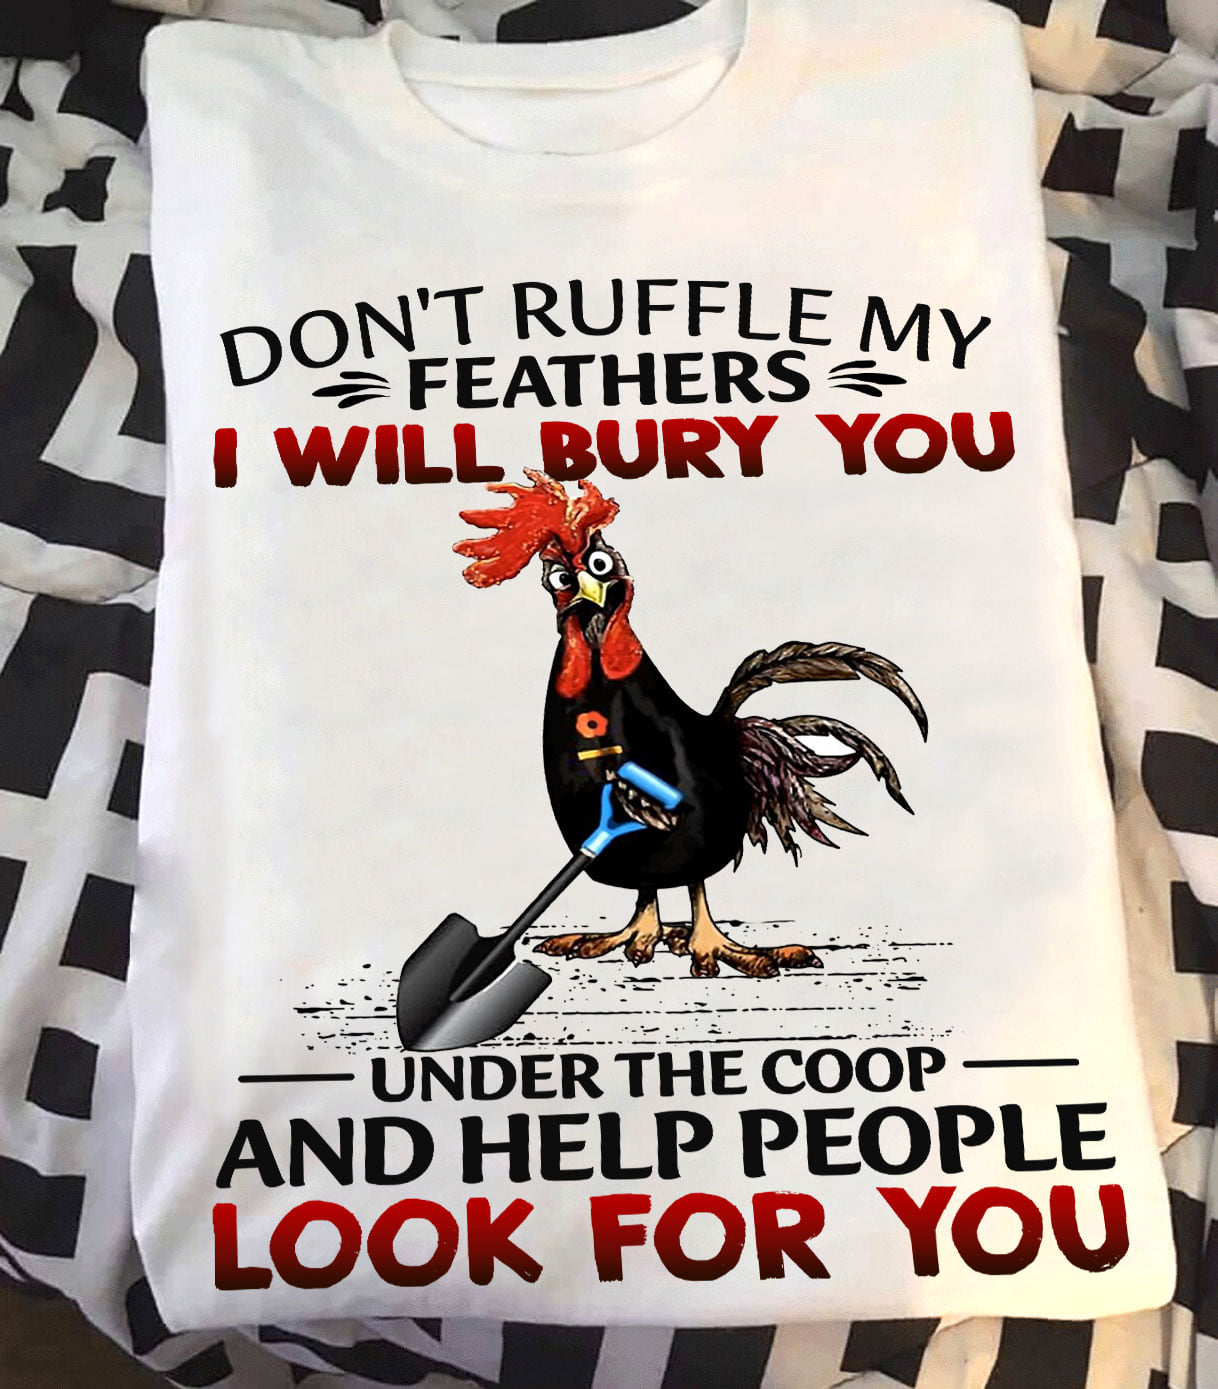 Don't ruffle my feathers I will bury you under the coop - Chicken lover